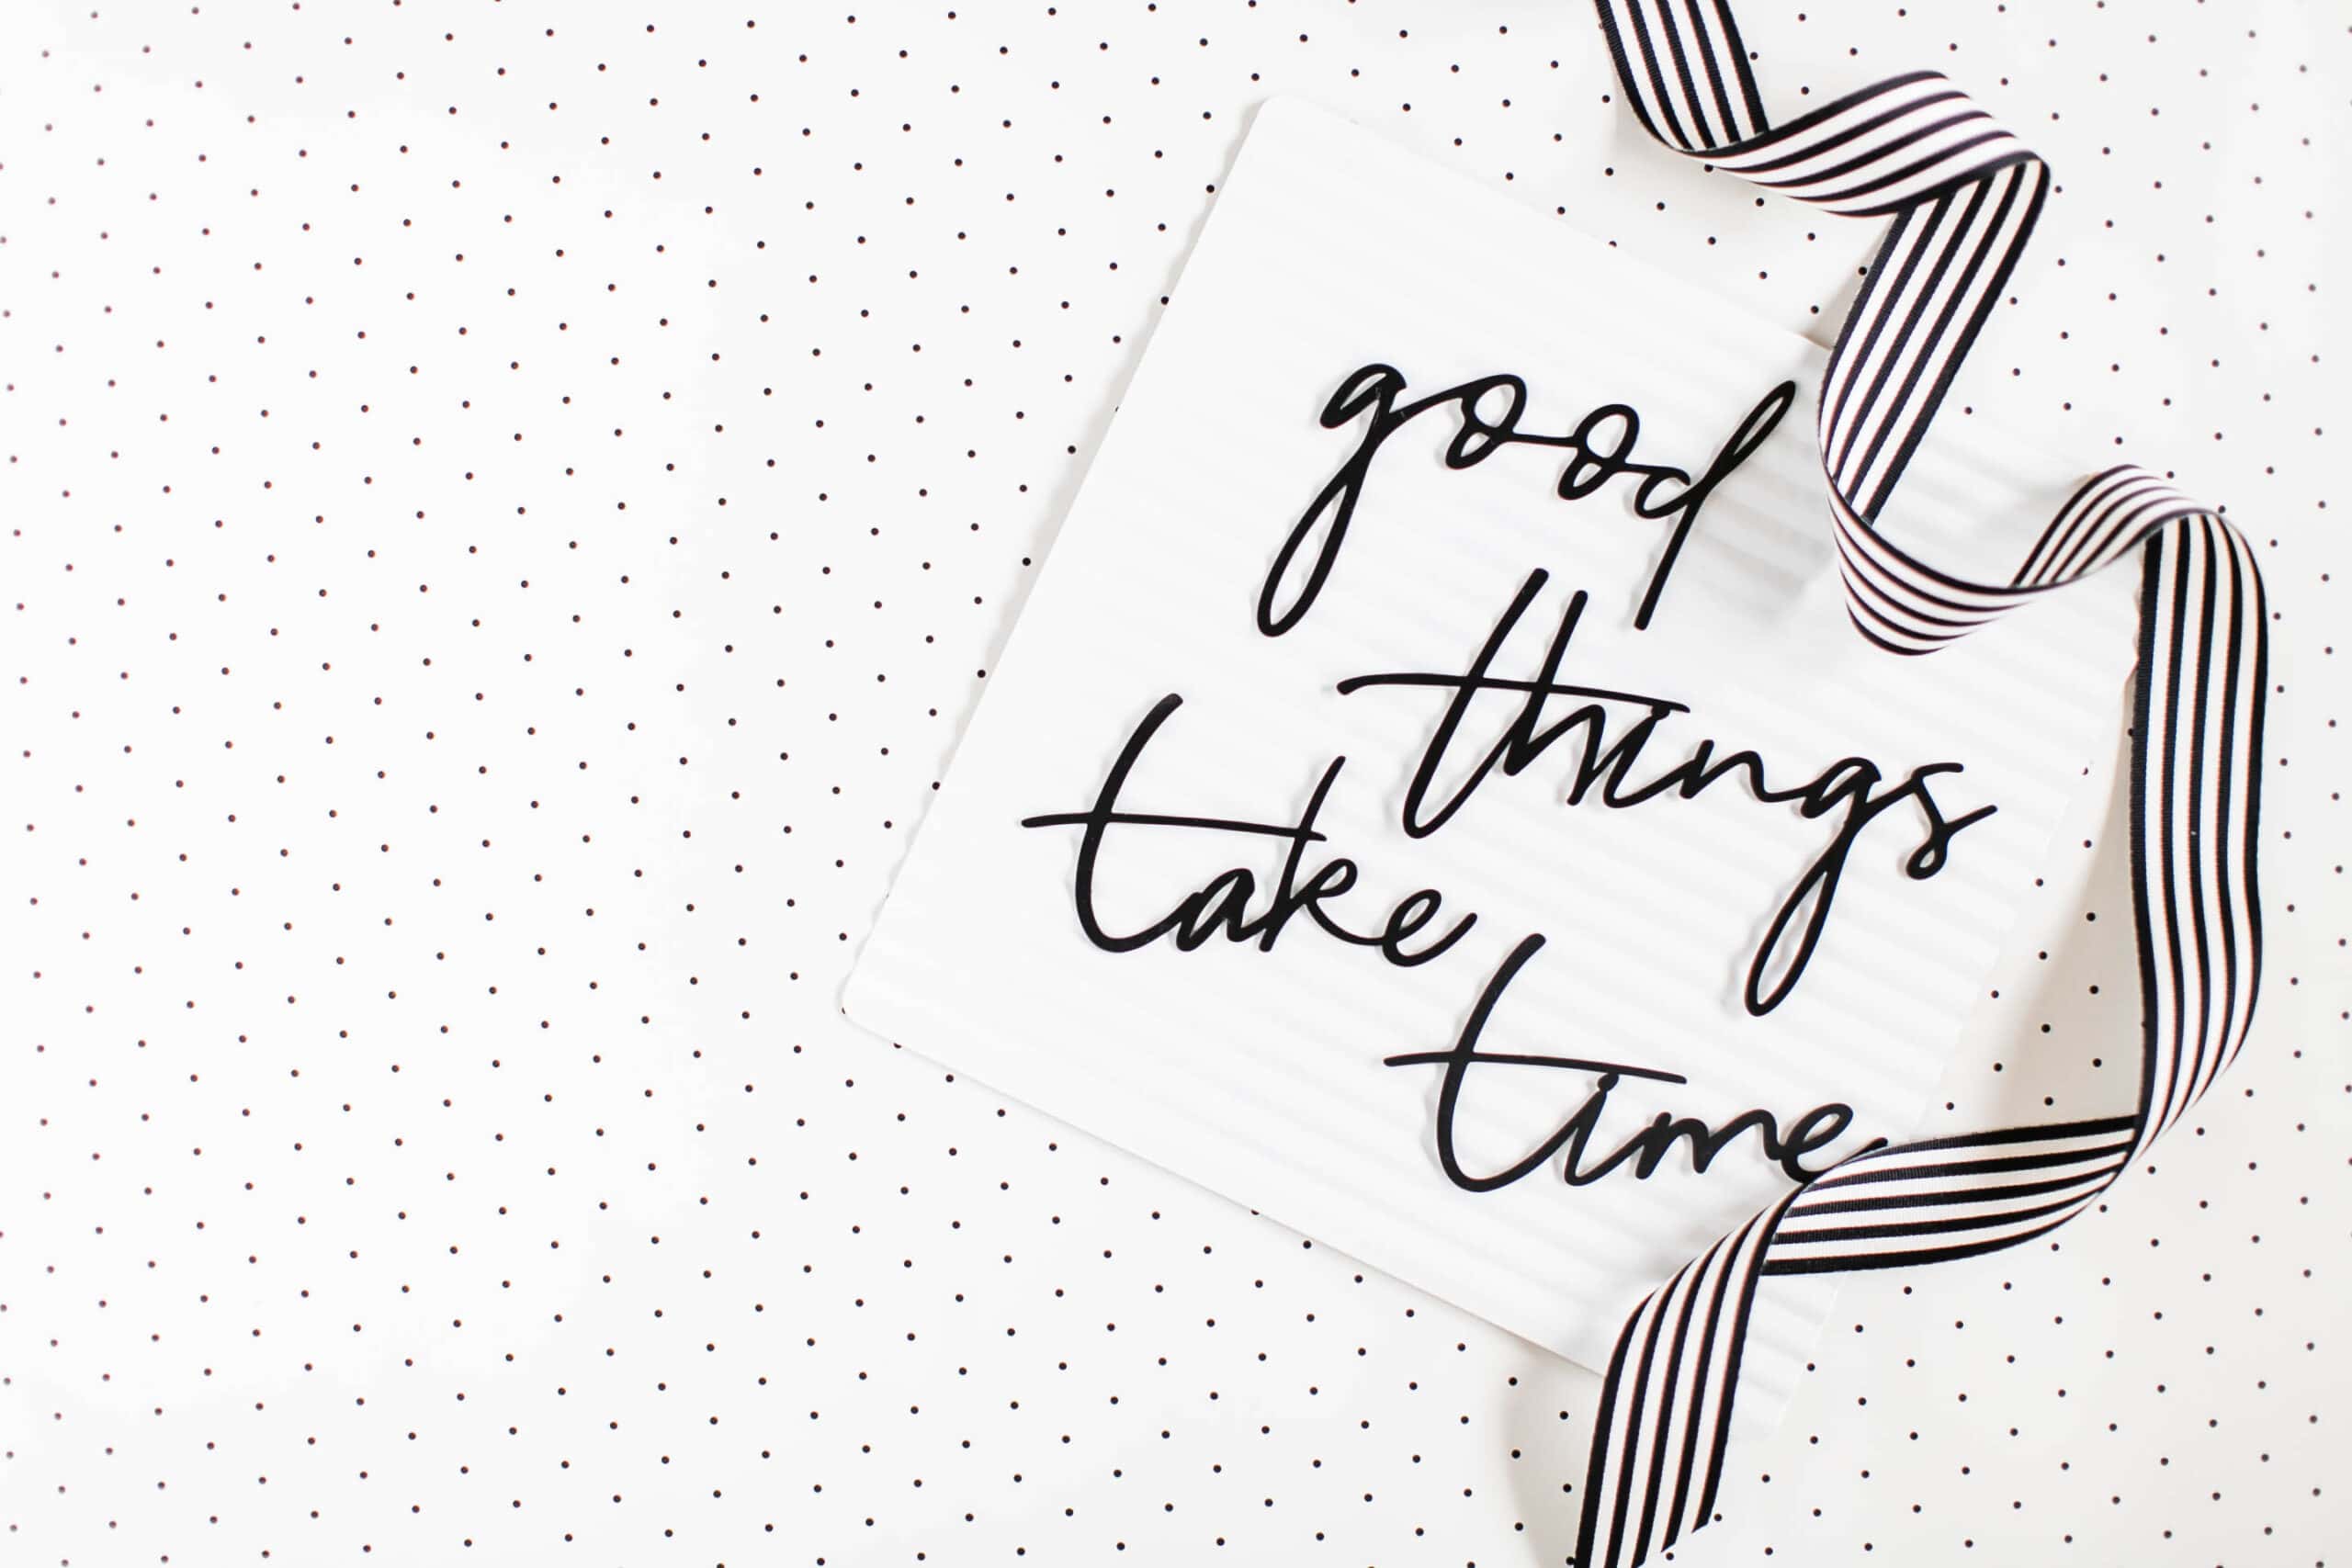 A white board with the inspirational quote "good things take time" from stories of empowerment, written on it, placed on a dotted background with a striped ribbon.